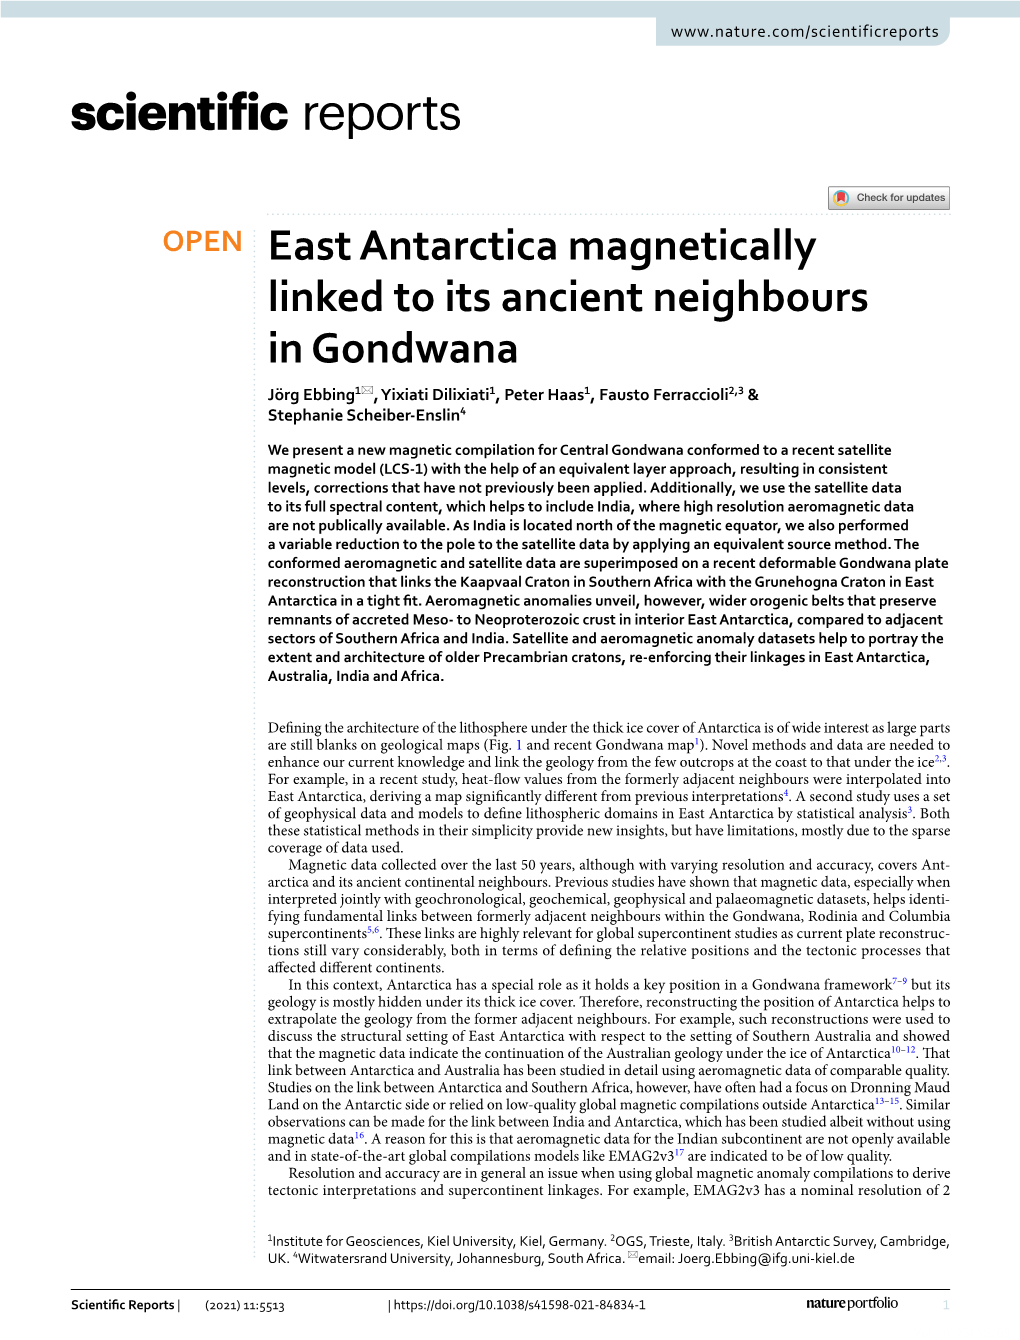 East Antarctica Magnetically Linked to Its Ancient Neighbours in Gondwana